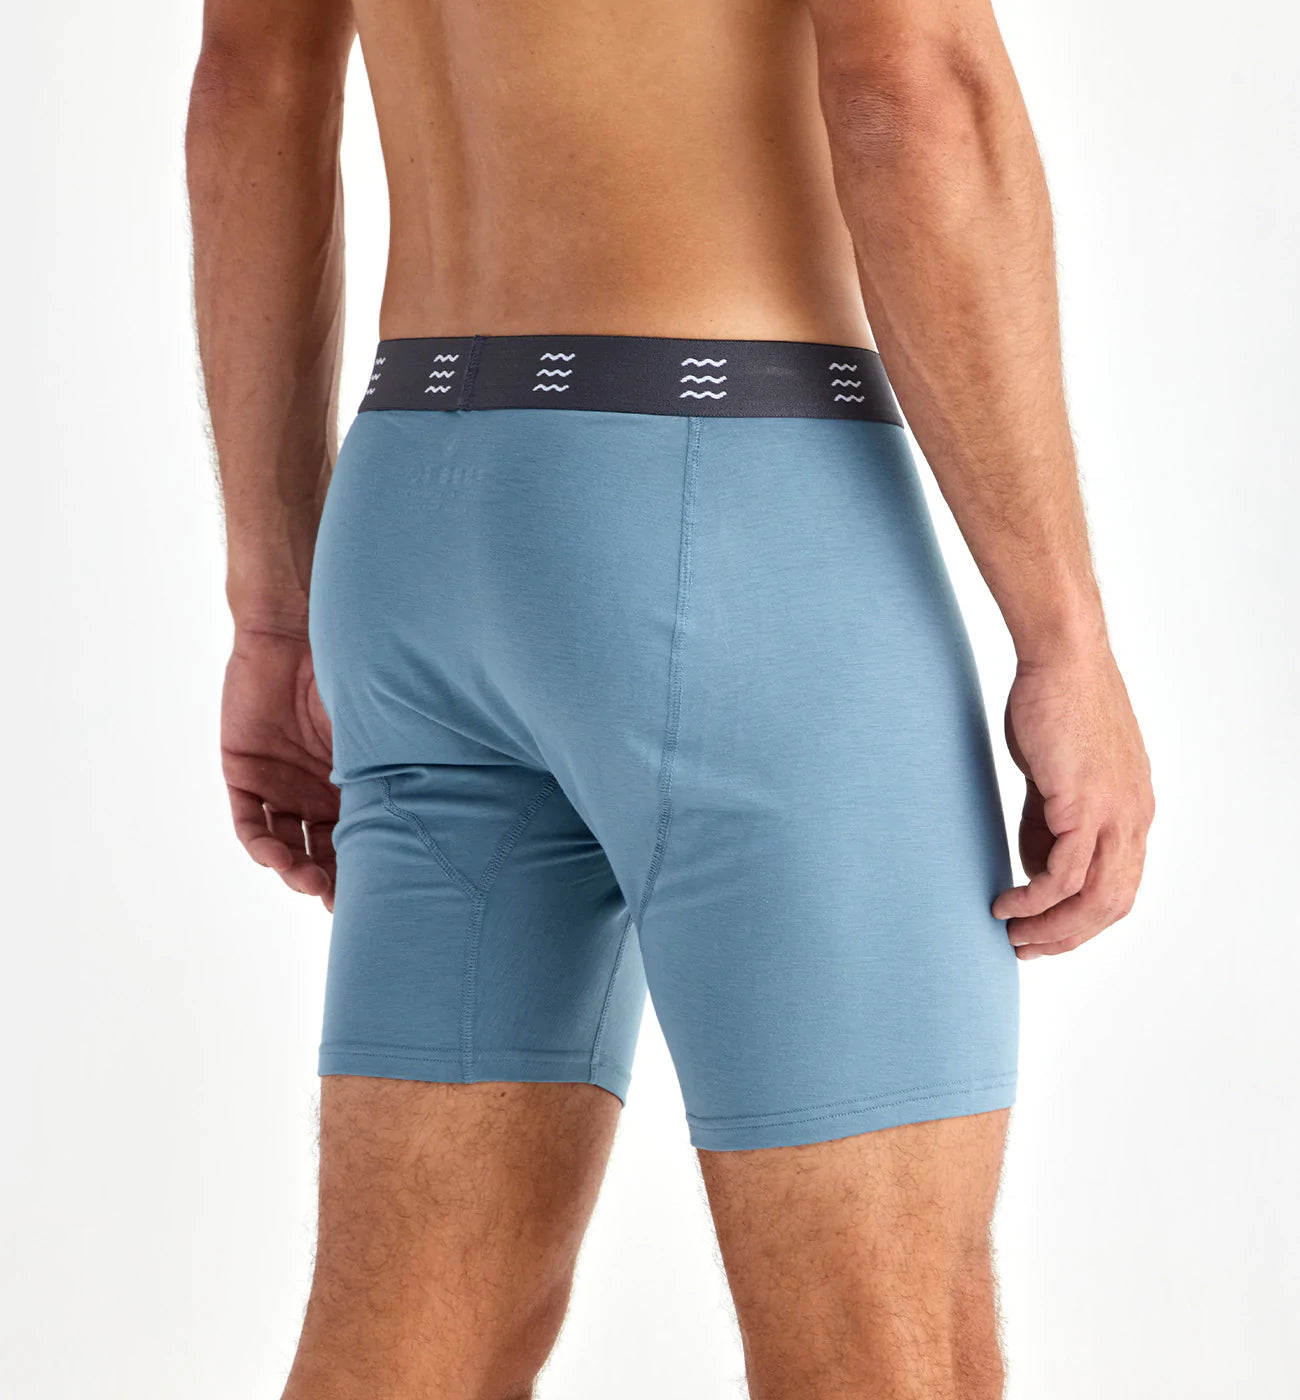 Men's Bamboo Boxer Brief - Free Fly